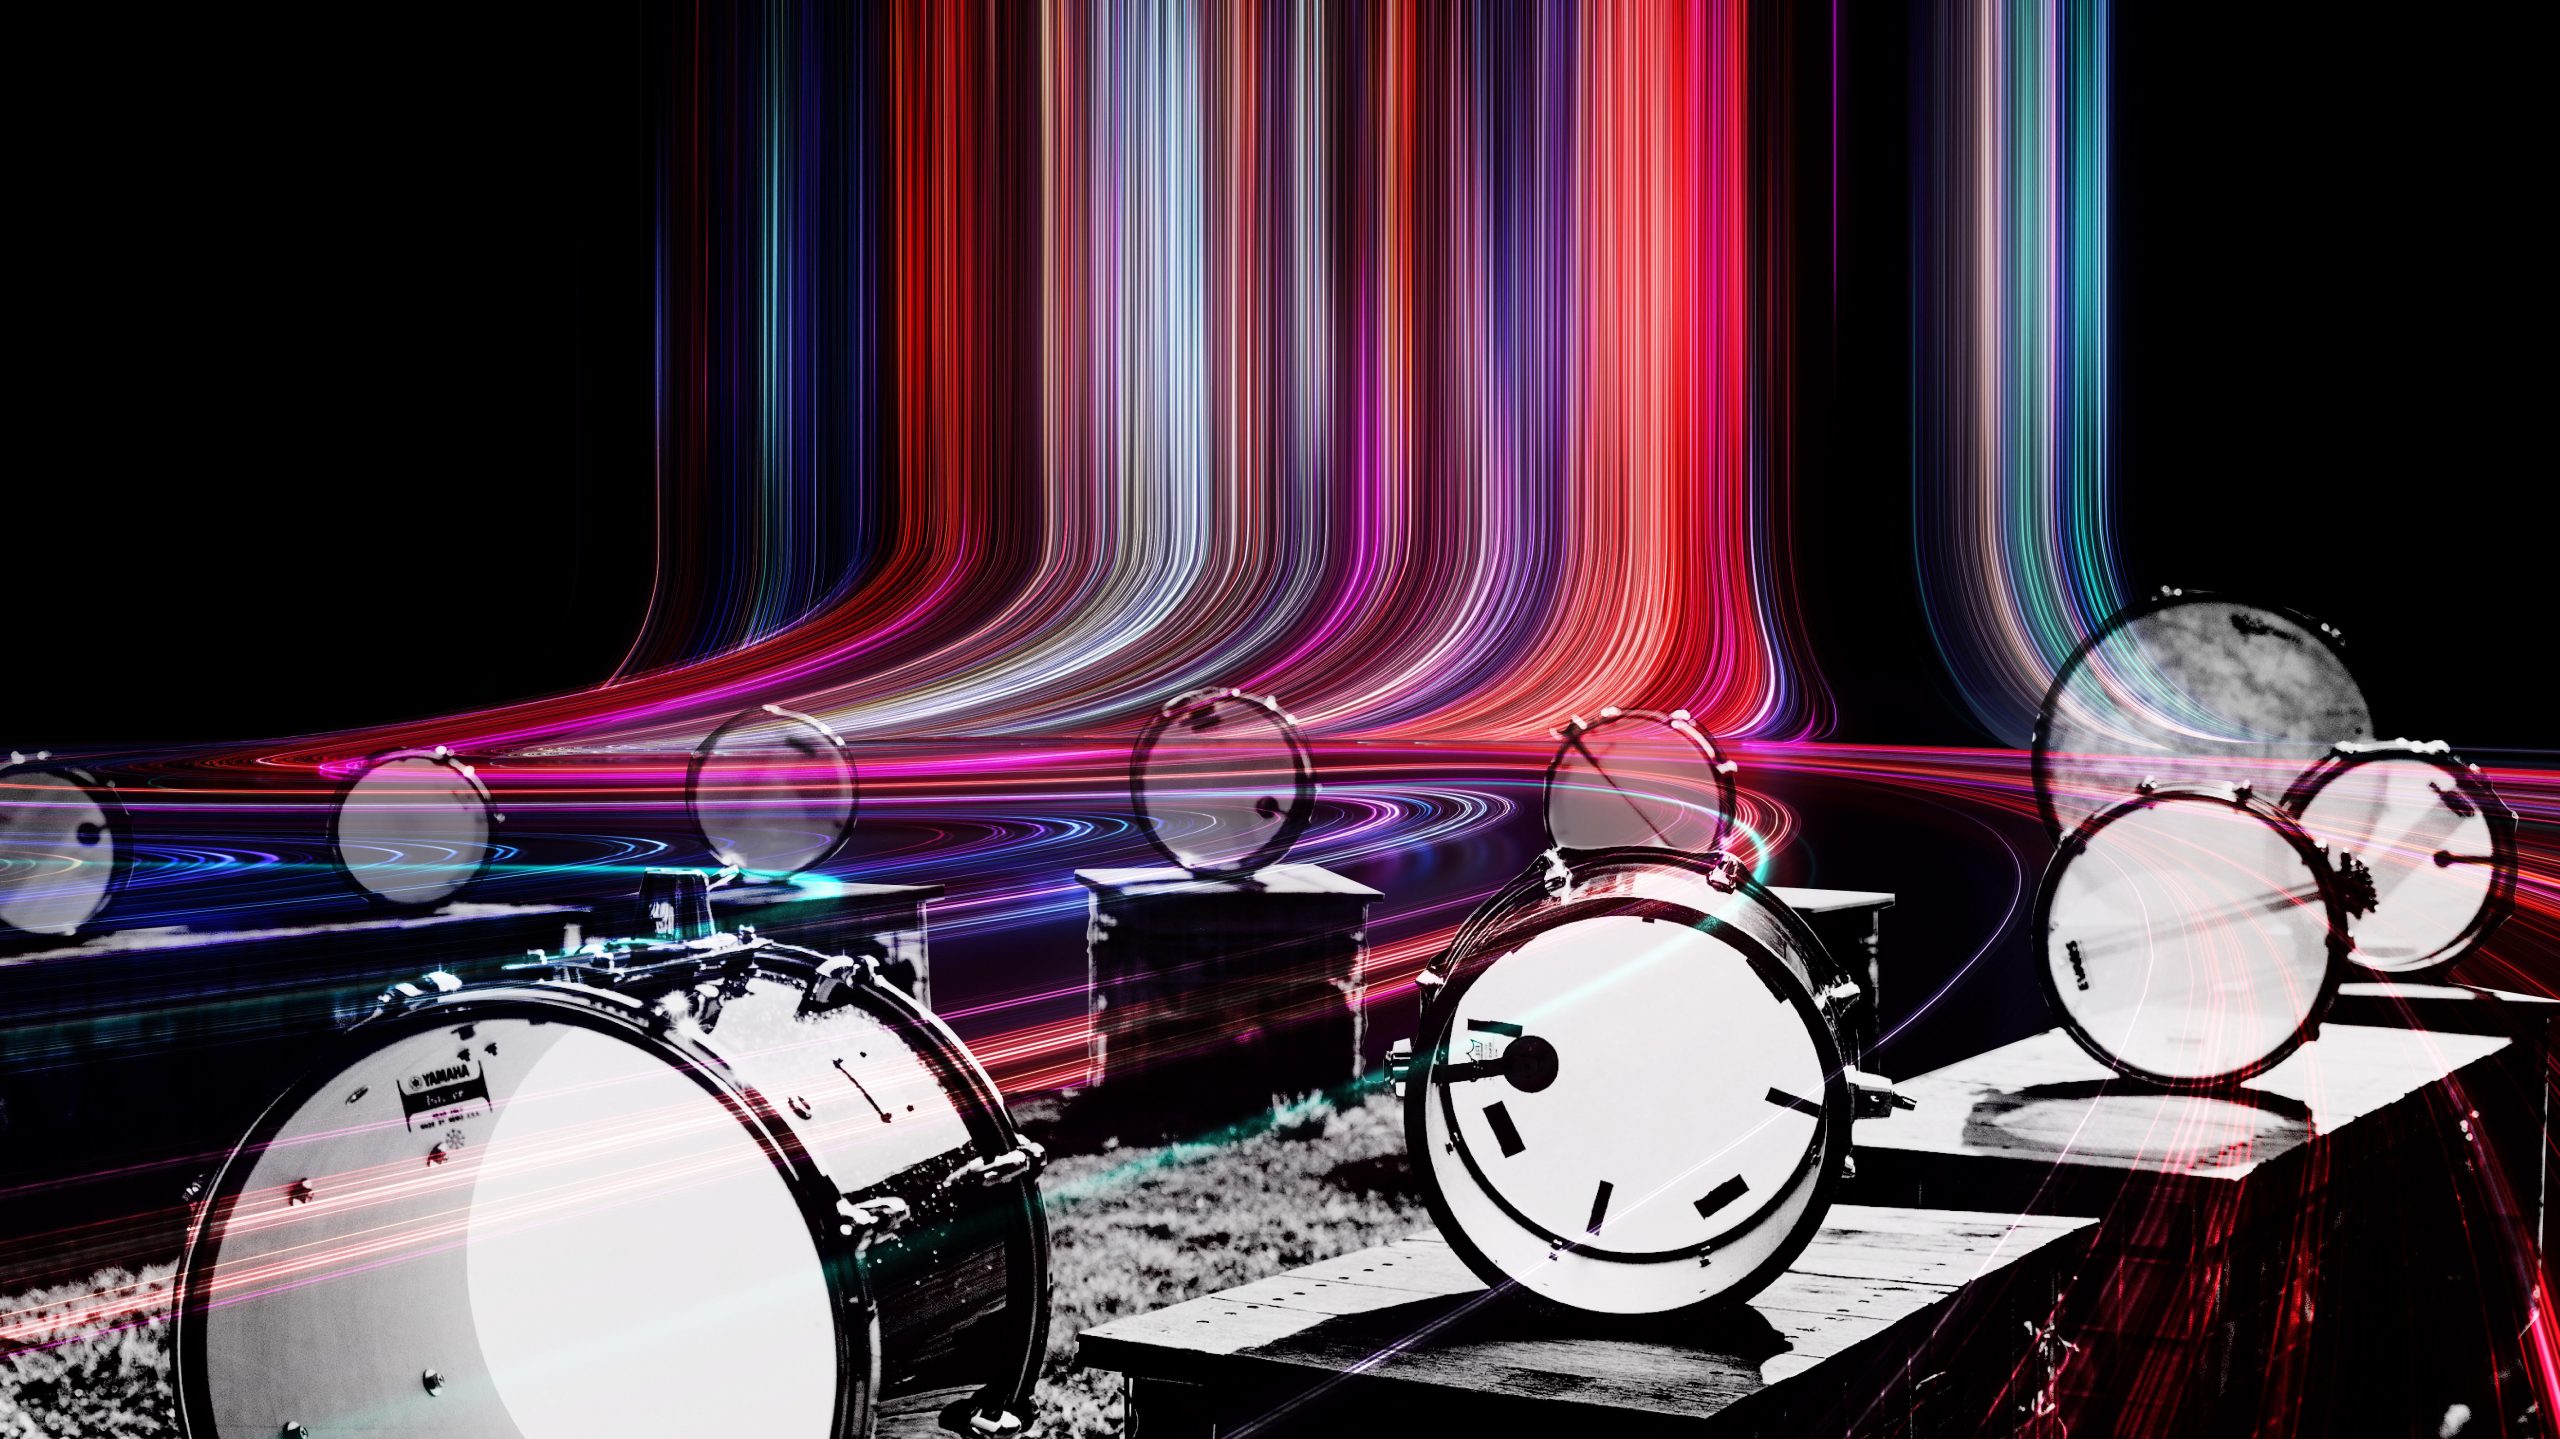 translucent drum heads float in a circle, whilst bright neon lights cascade through the centre and warp around the drums.